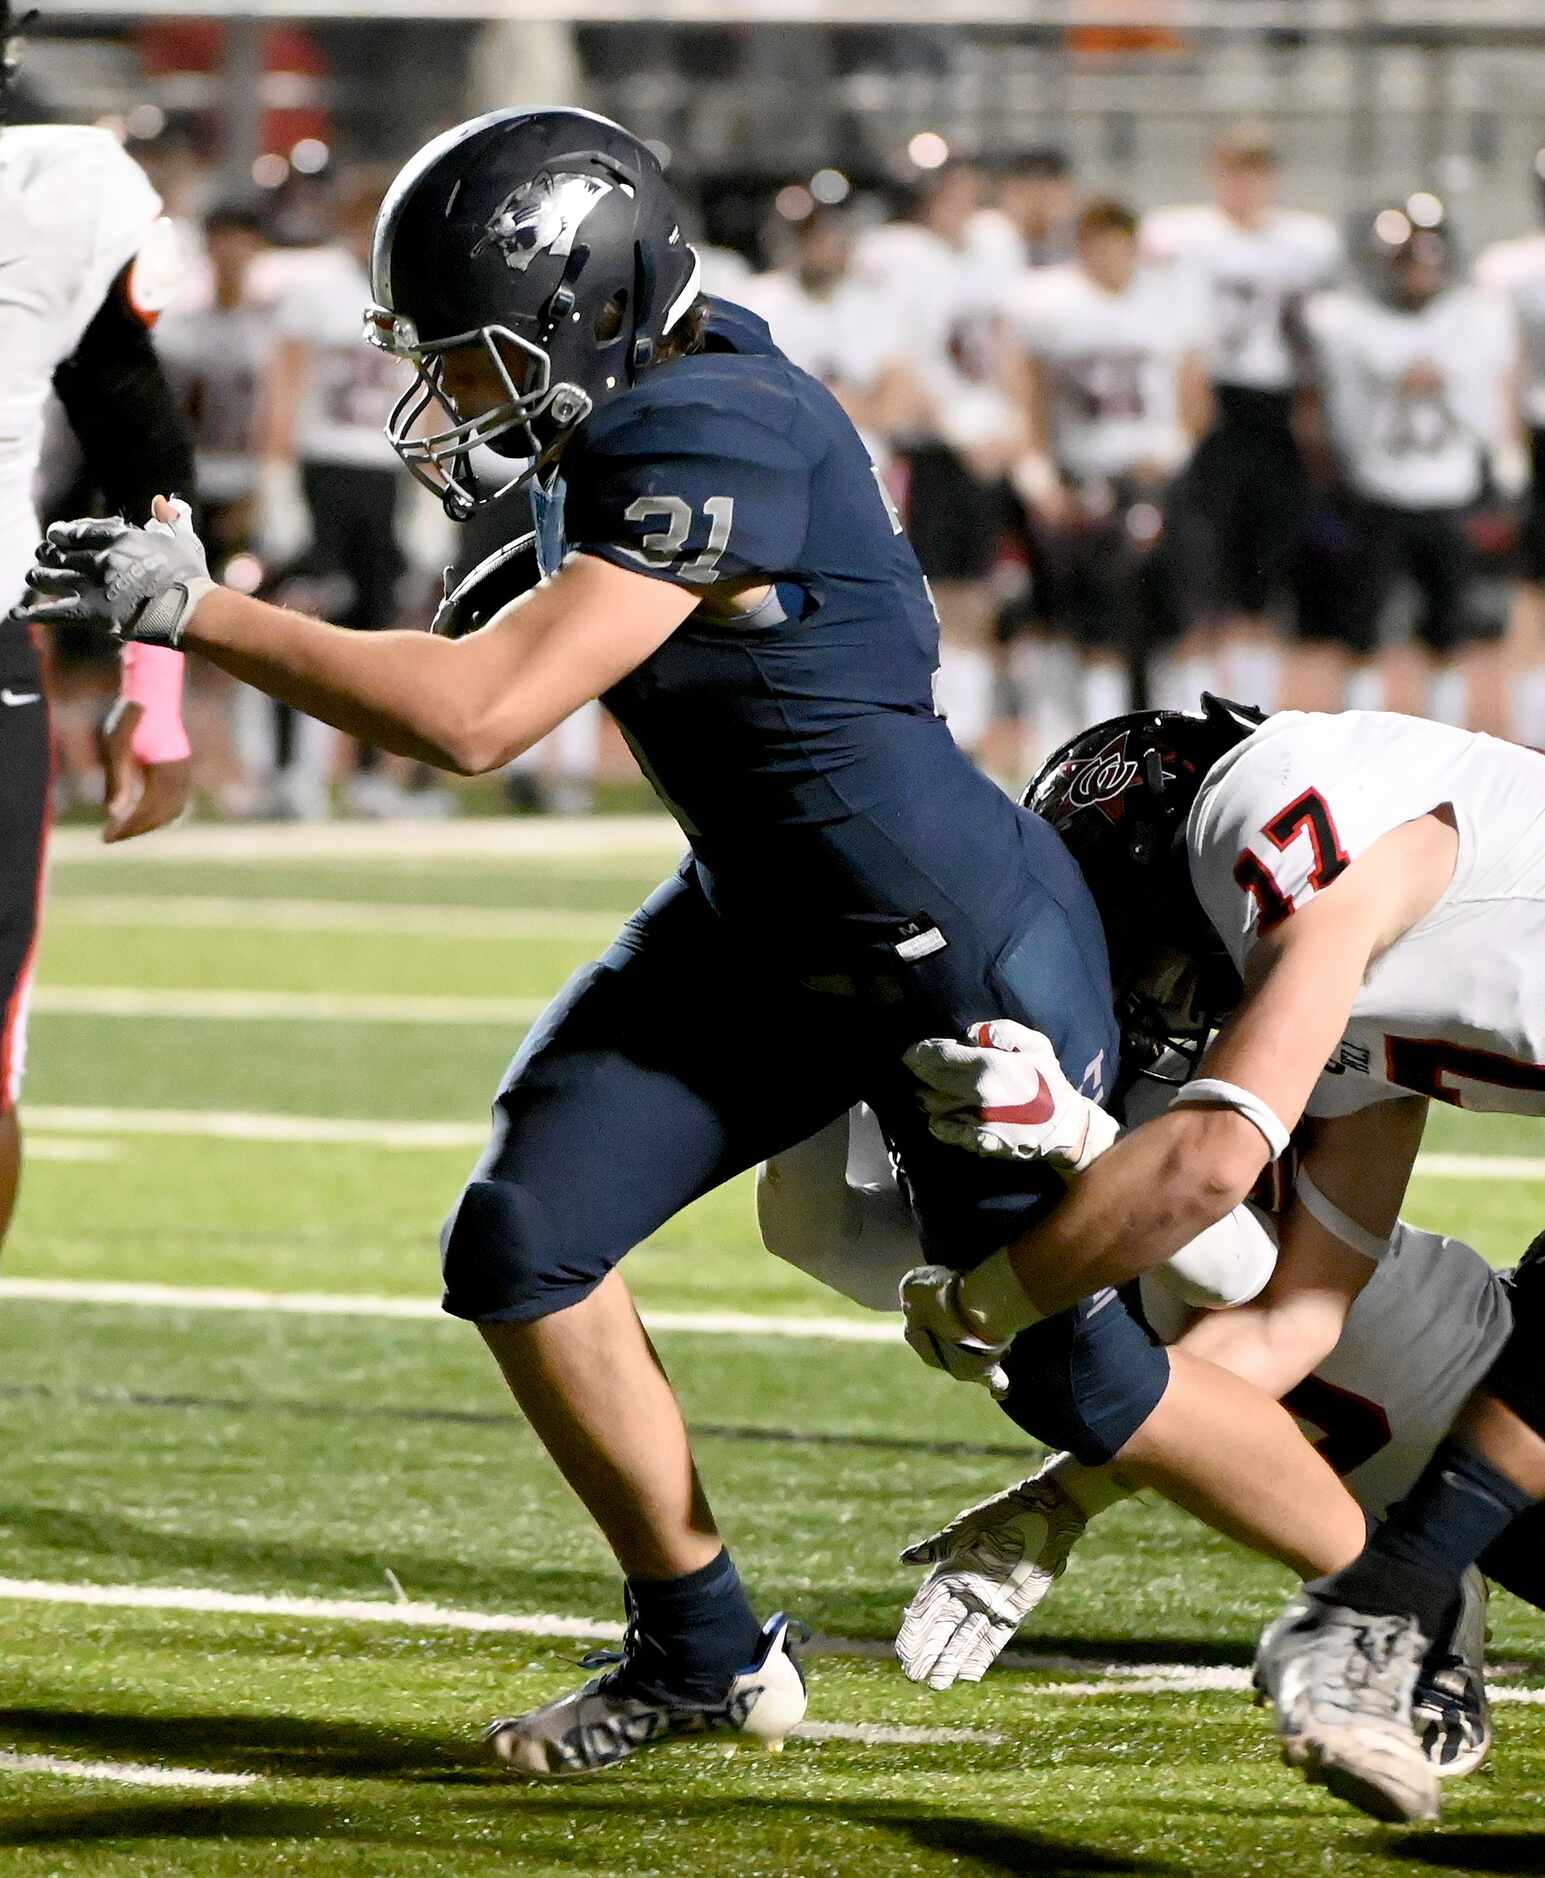 Flower Mound's Peyton Porter (31) runs through tackle attempts by Coppell’s Jack McAdams...